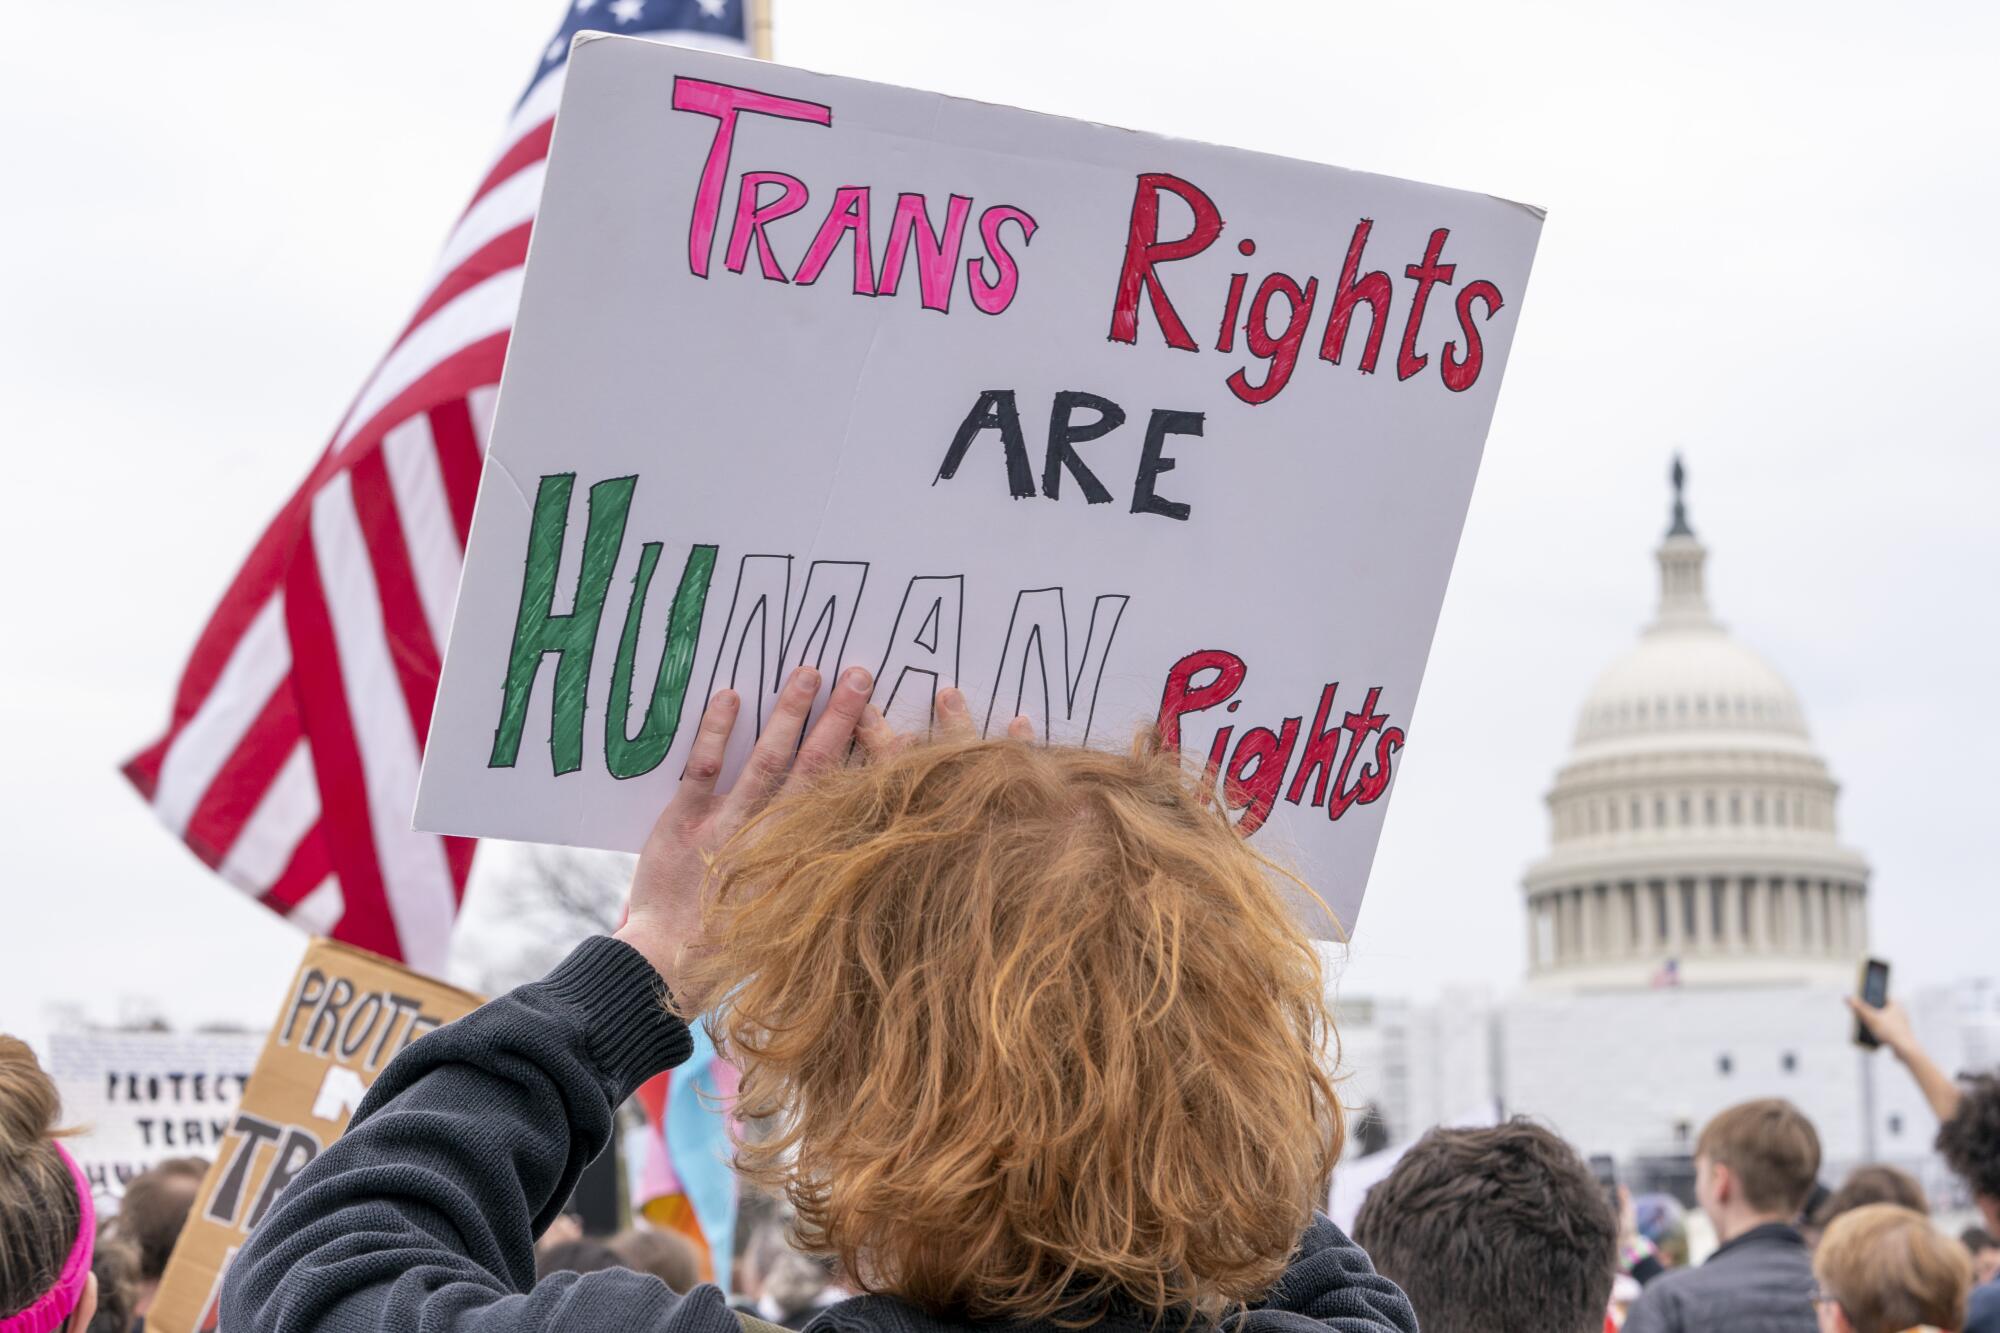 A person holds up a sign that says "Trans rights are human rights."